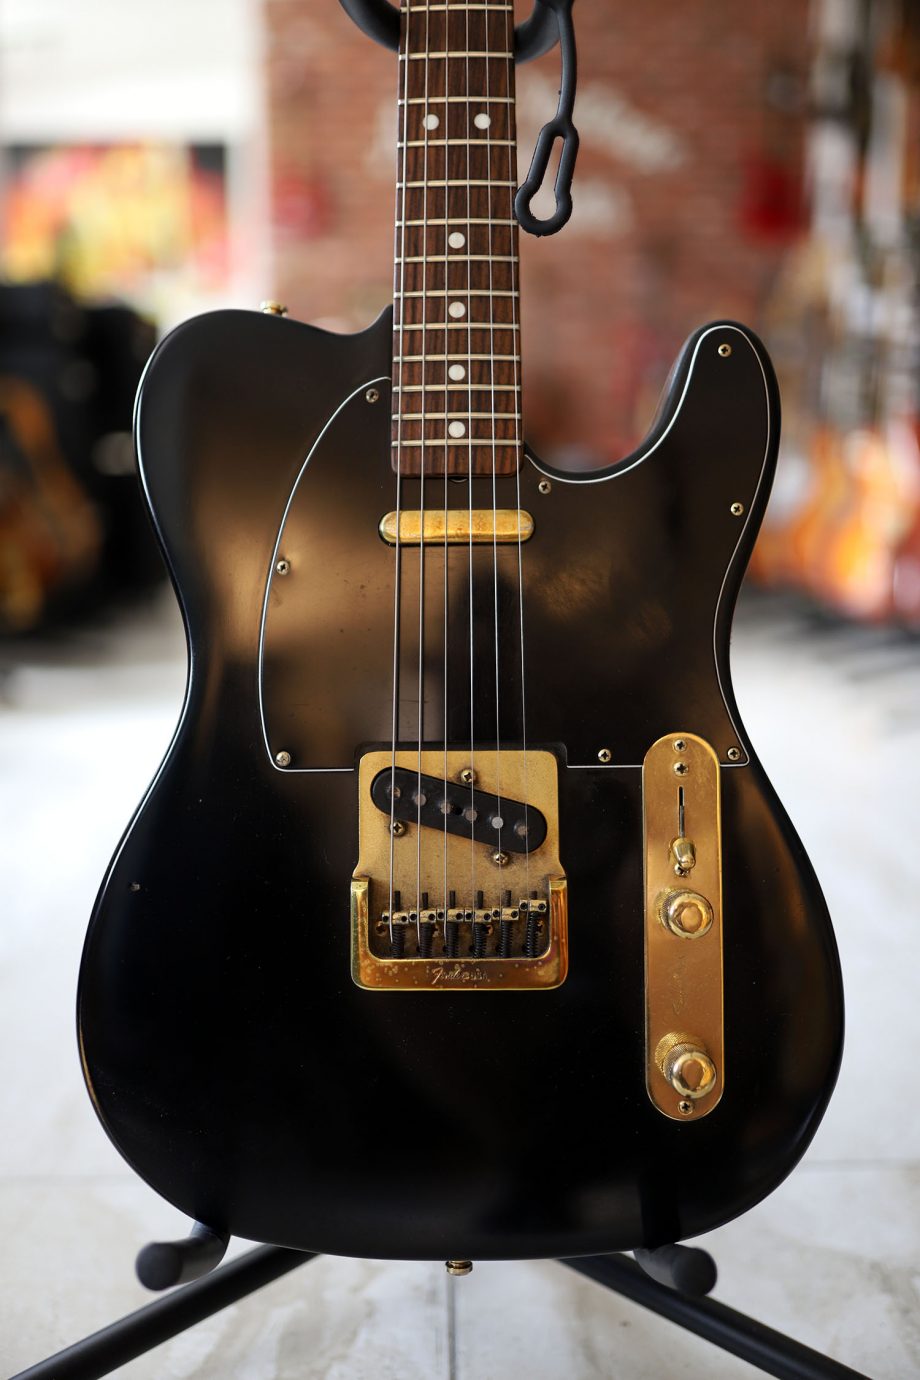 FENDER COLLECTORS EDITION BLACK AND GOLD TELECASTER 1981 USA